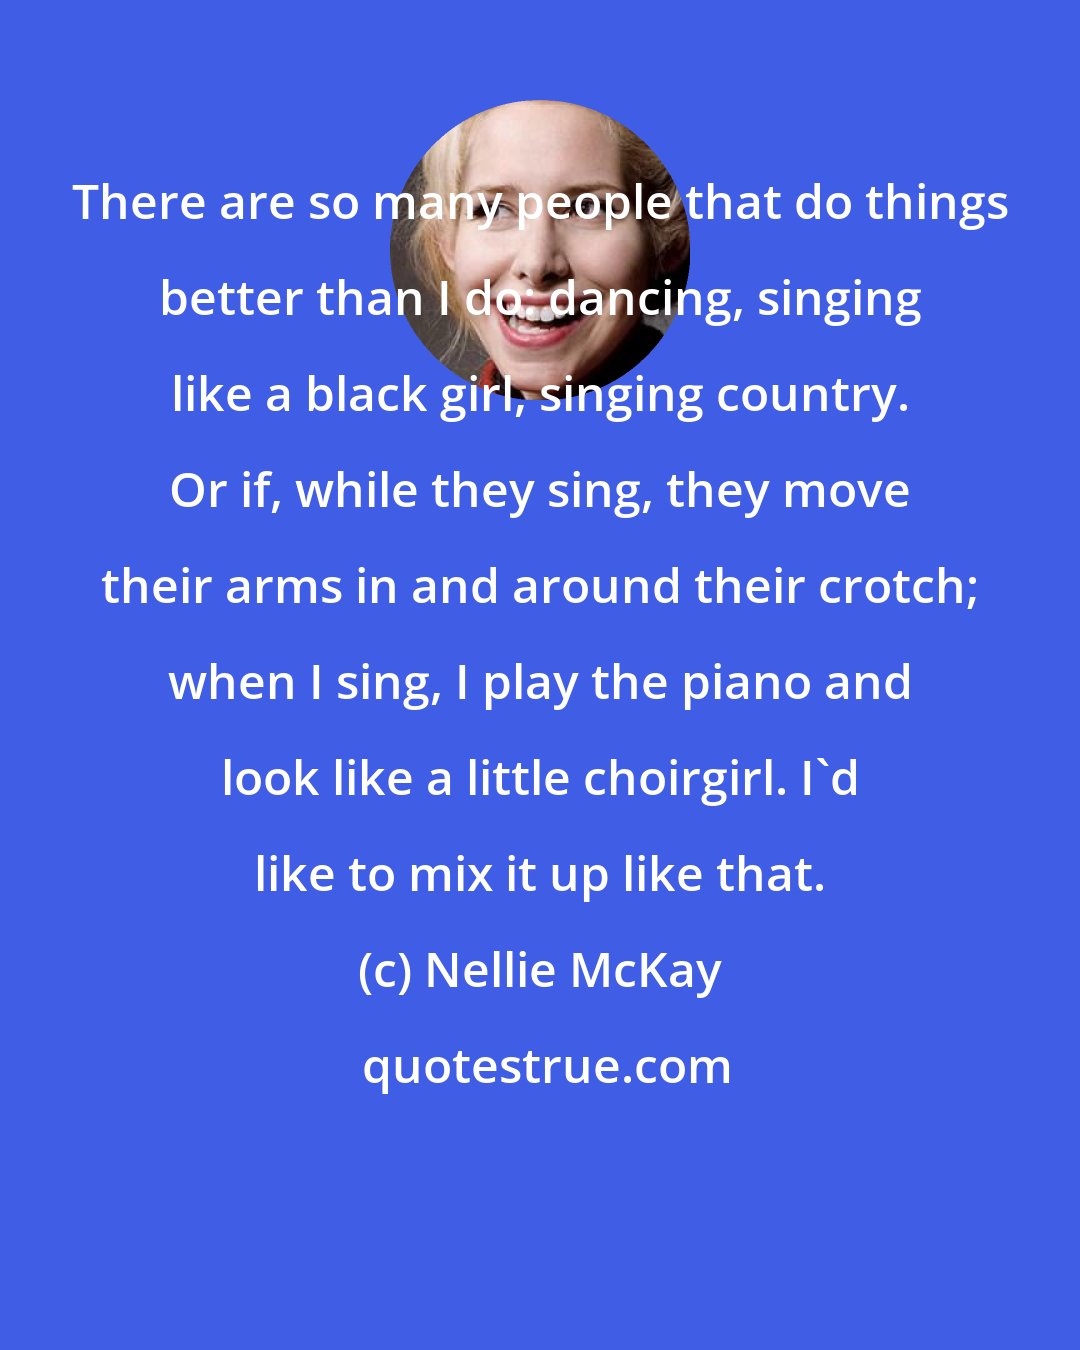 Nellie McKay: There are so many people that do things better than I do: dancing, singing like a black girl, singing country. Or if, while they sing, they move their arms in and around their crotch; when I sing, I play the piano and look like a little choirgirl. I'd like to mix it up like that.